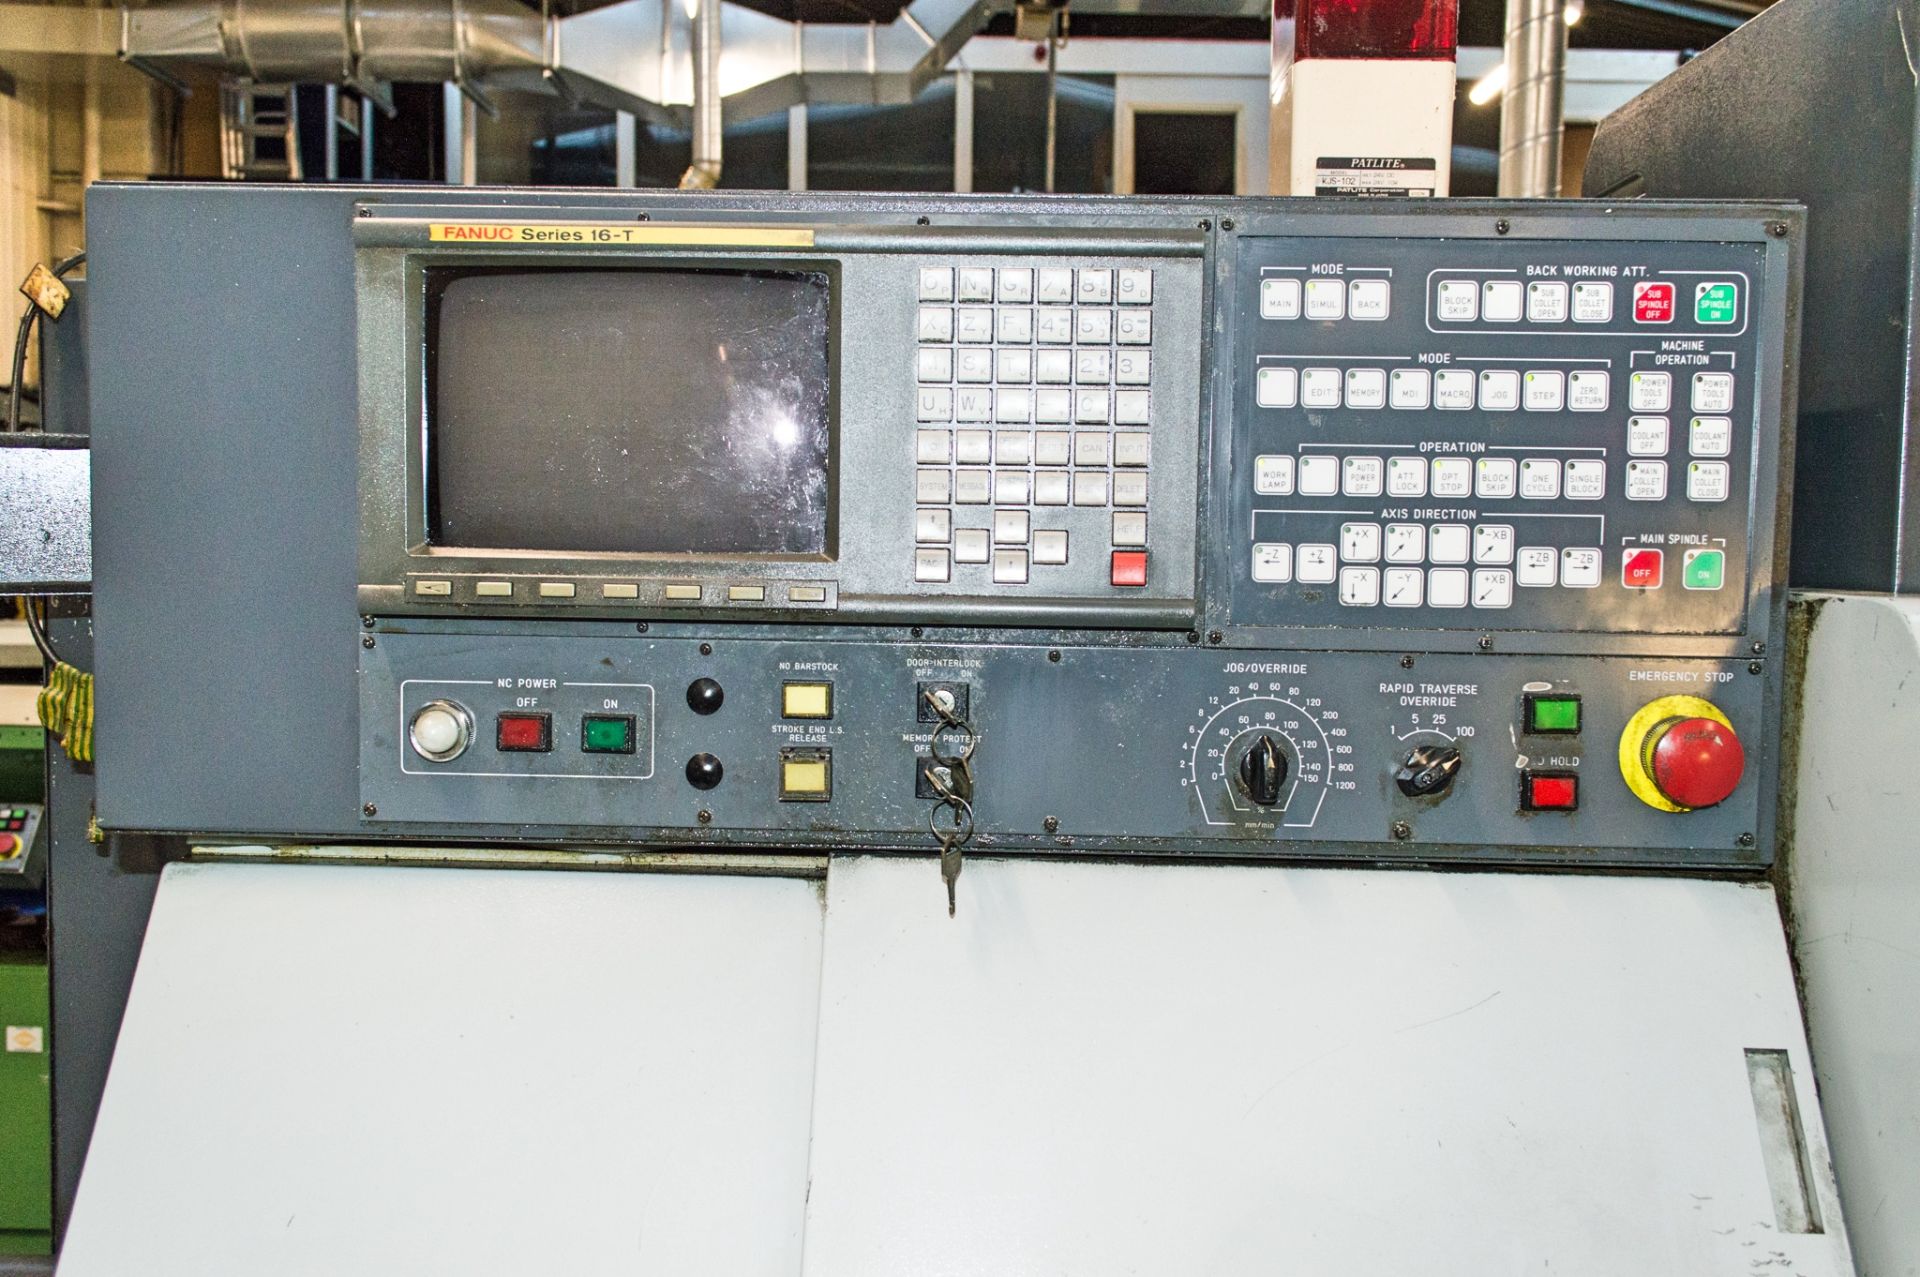 Star SR-32 Type 330 CNC sliding head lathe S/N: 031016 c/w Fanuc 16-T controls, component delivery - Image 8 of 12